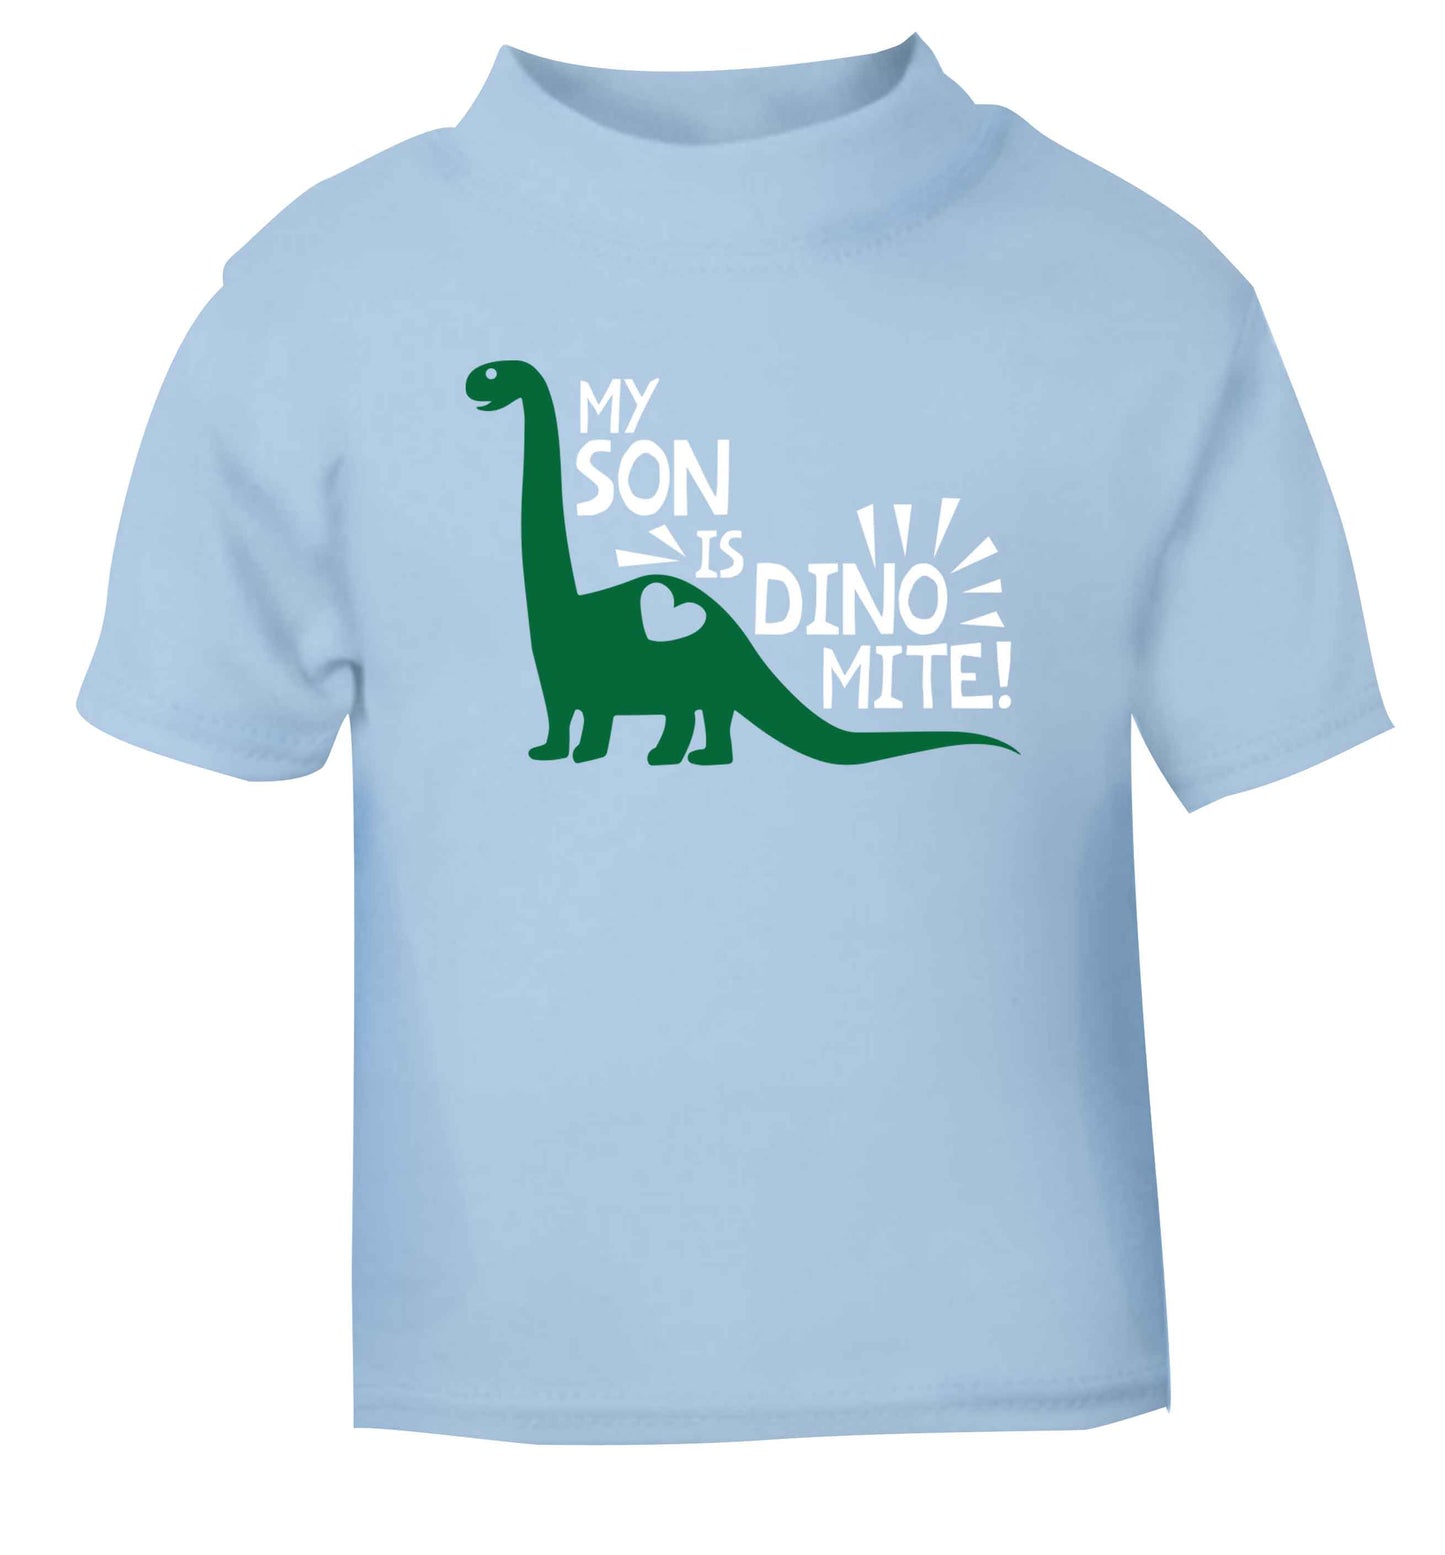 My son is dinomite! light blue Baby Toddler Tshirt 2 Years